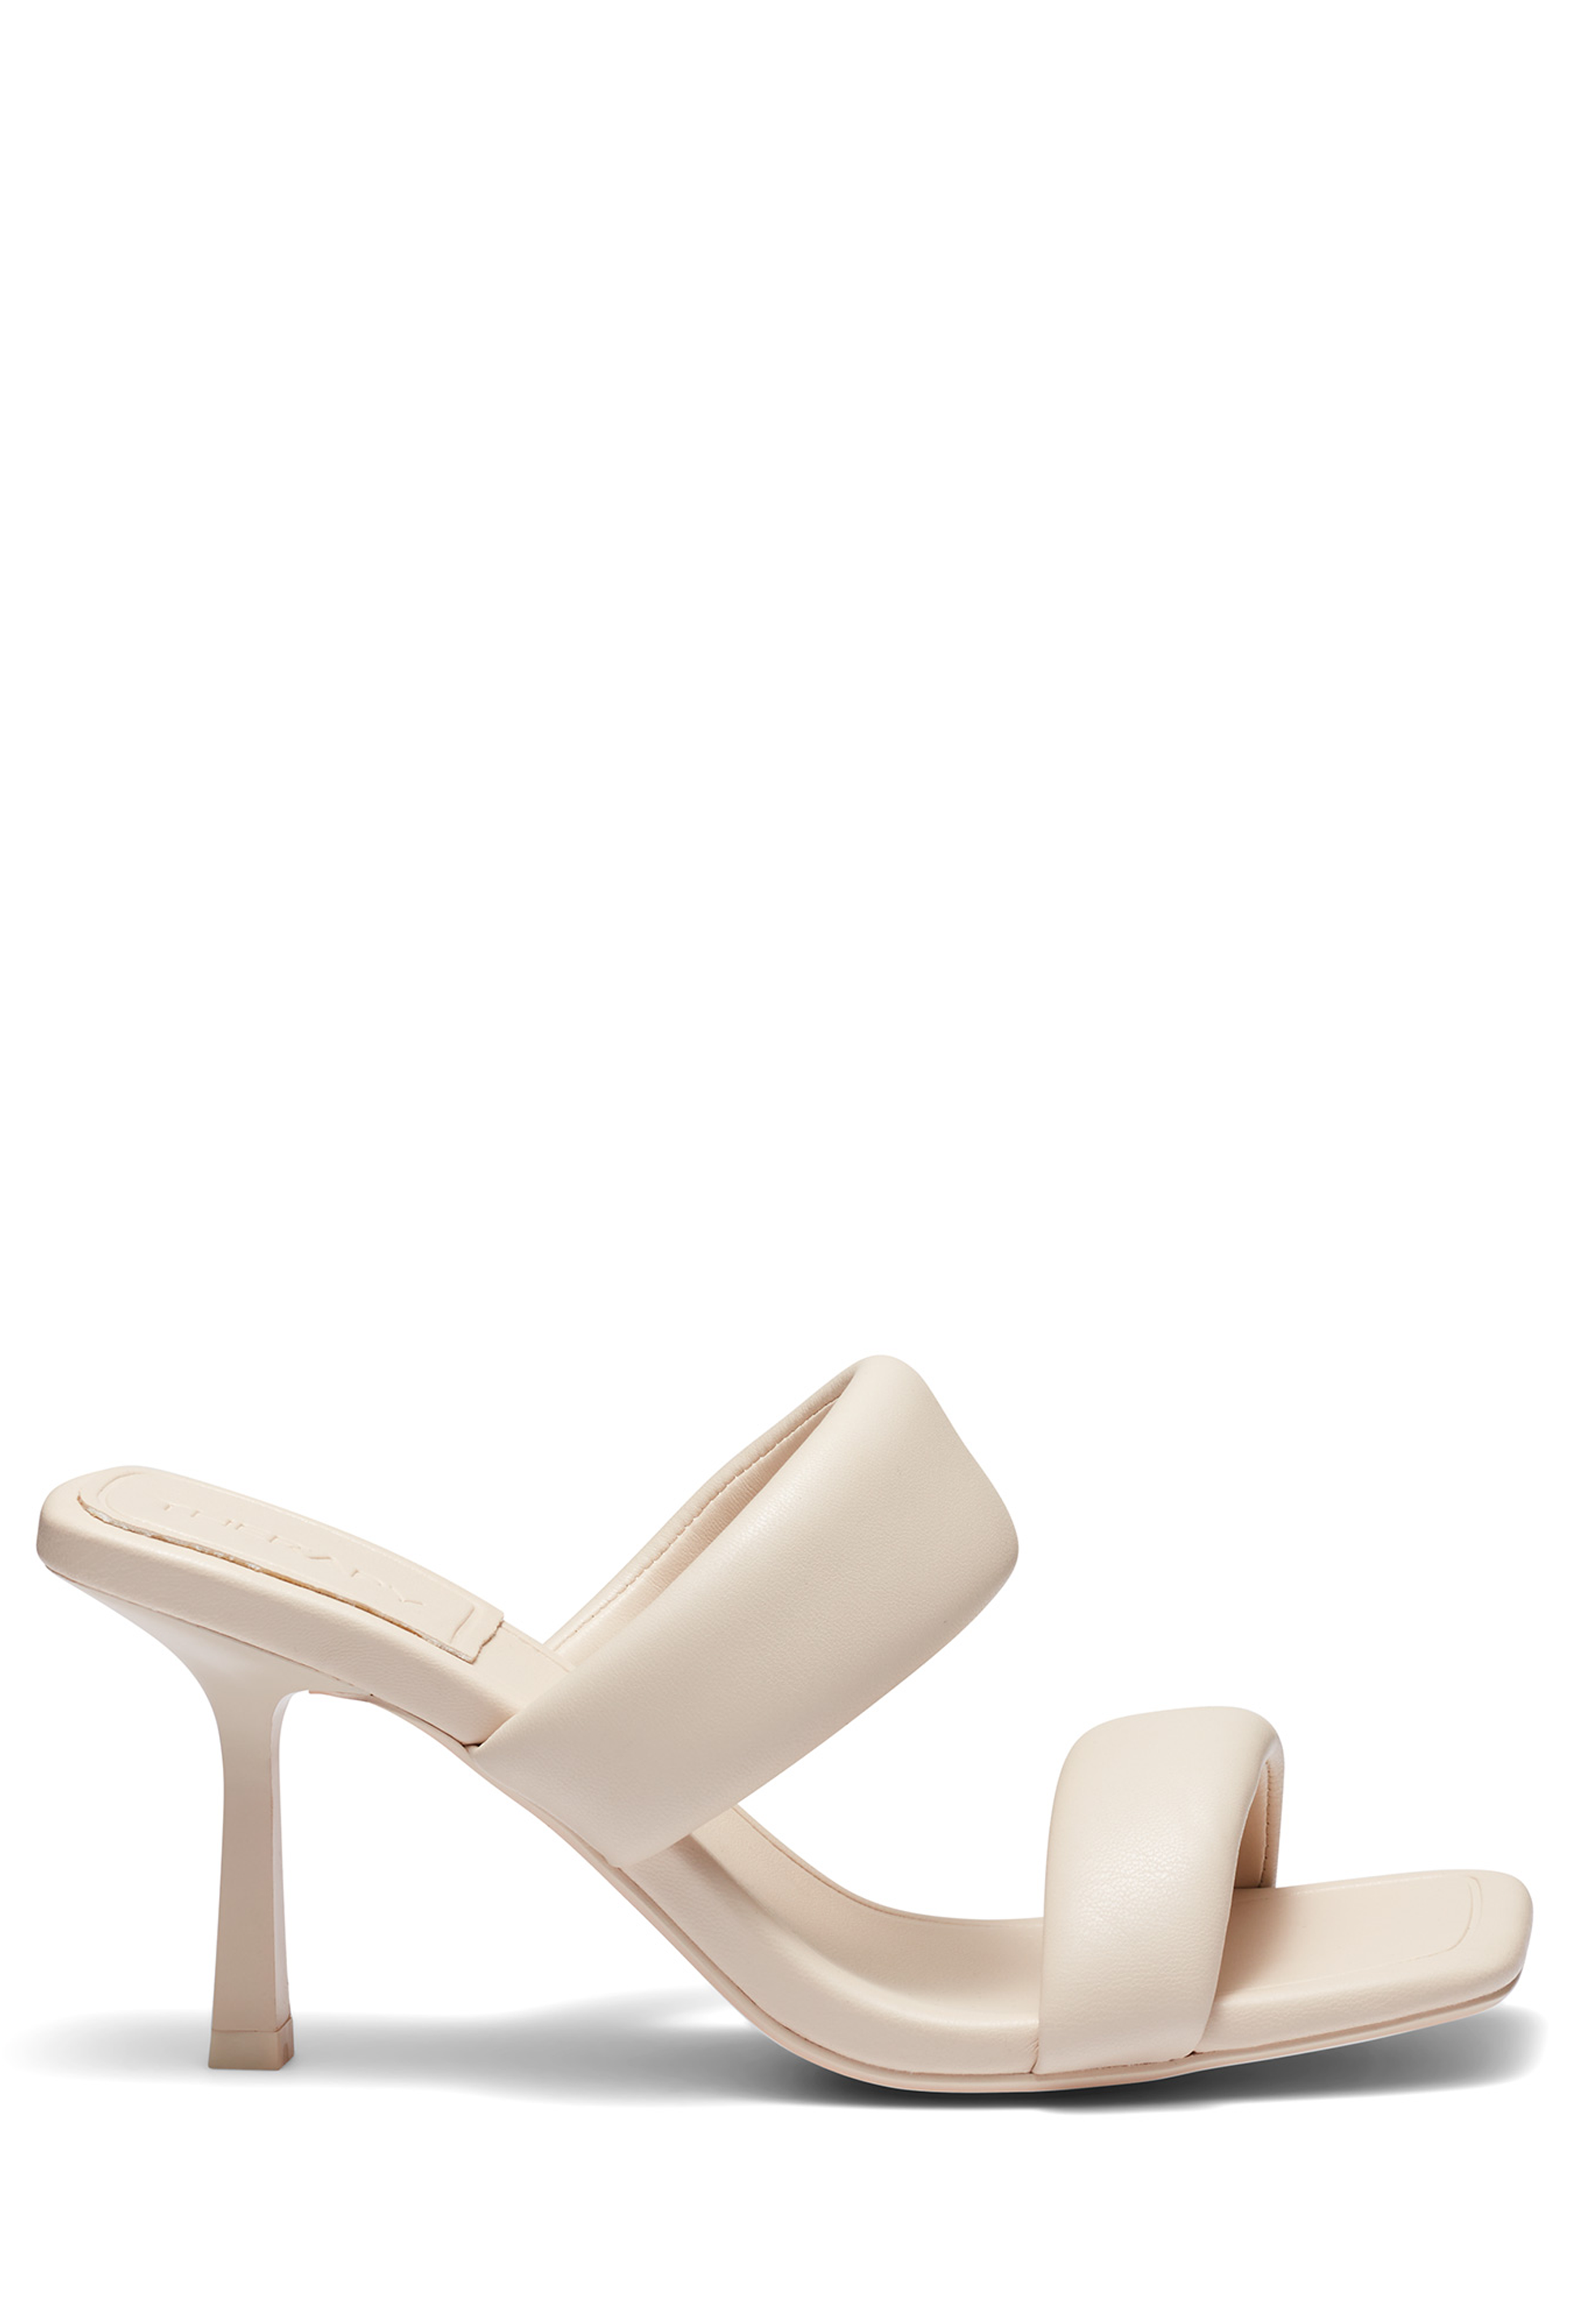 THERAPY Dolla Heels Shoes - Bone